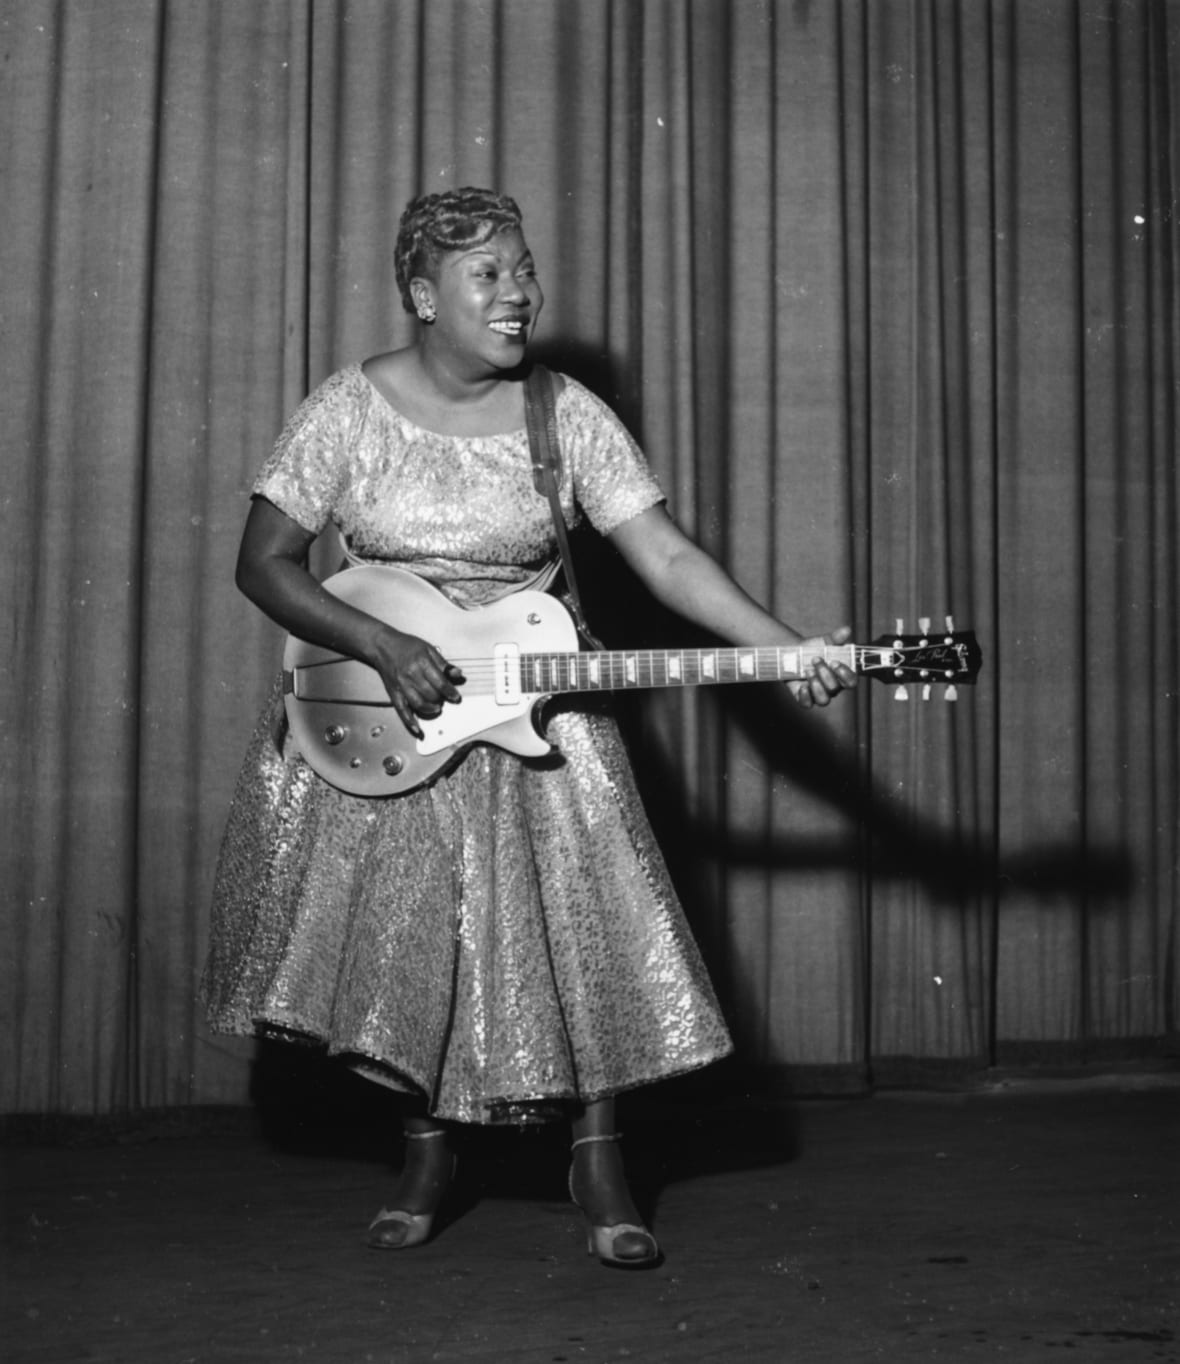 American singer Sister Rosetta Tharpe performing on stage with her guitar and Chris Barber's Jazz Band, Cardiff, Wales, November 1957. (Photo by Chris Ware/Keystone Features/Getty Images)